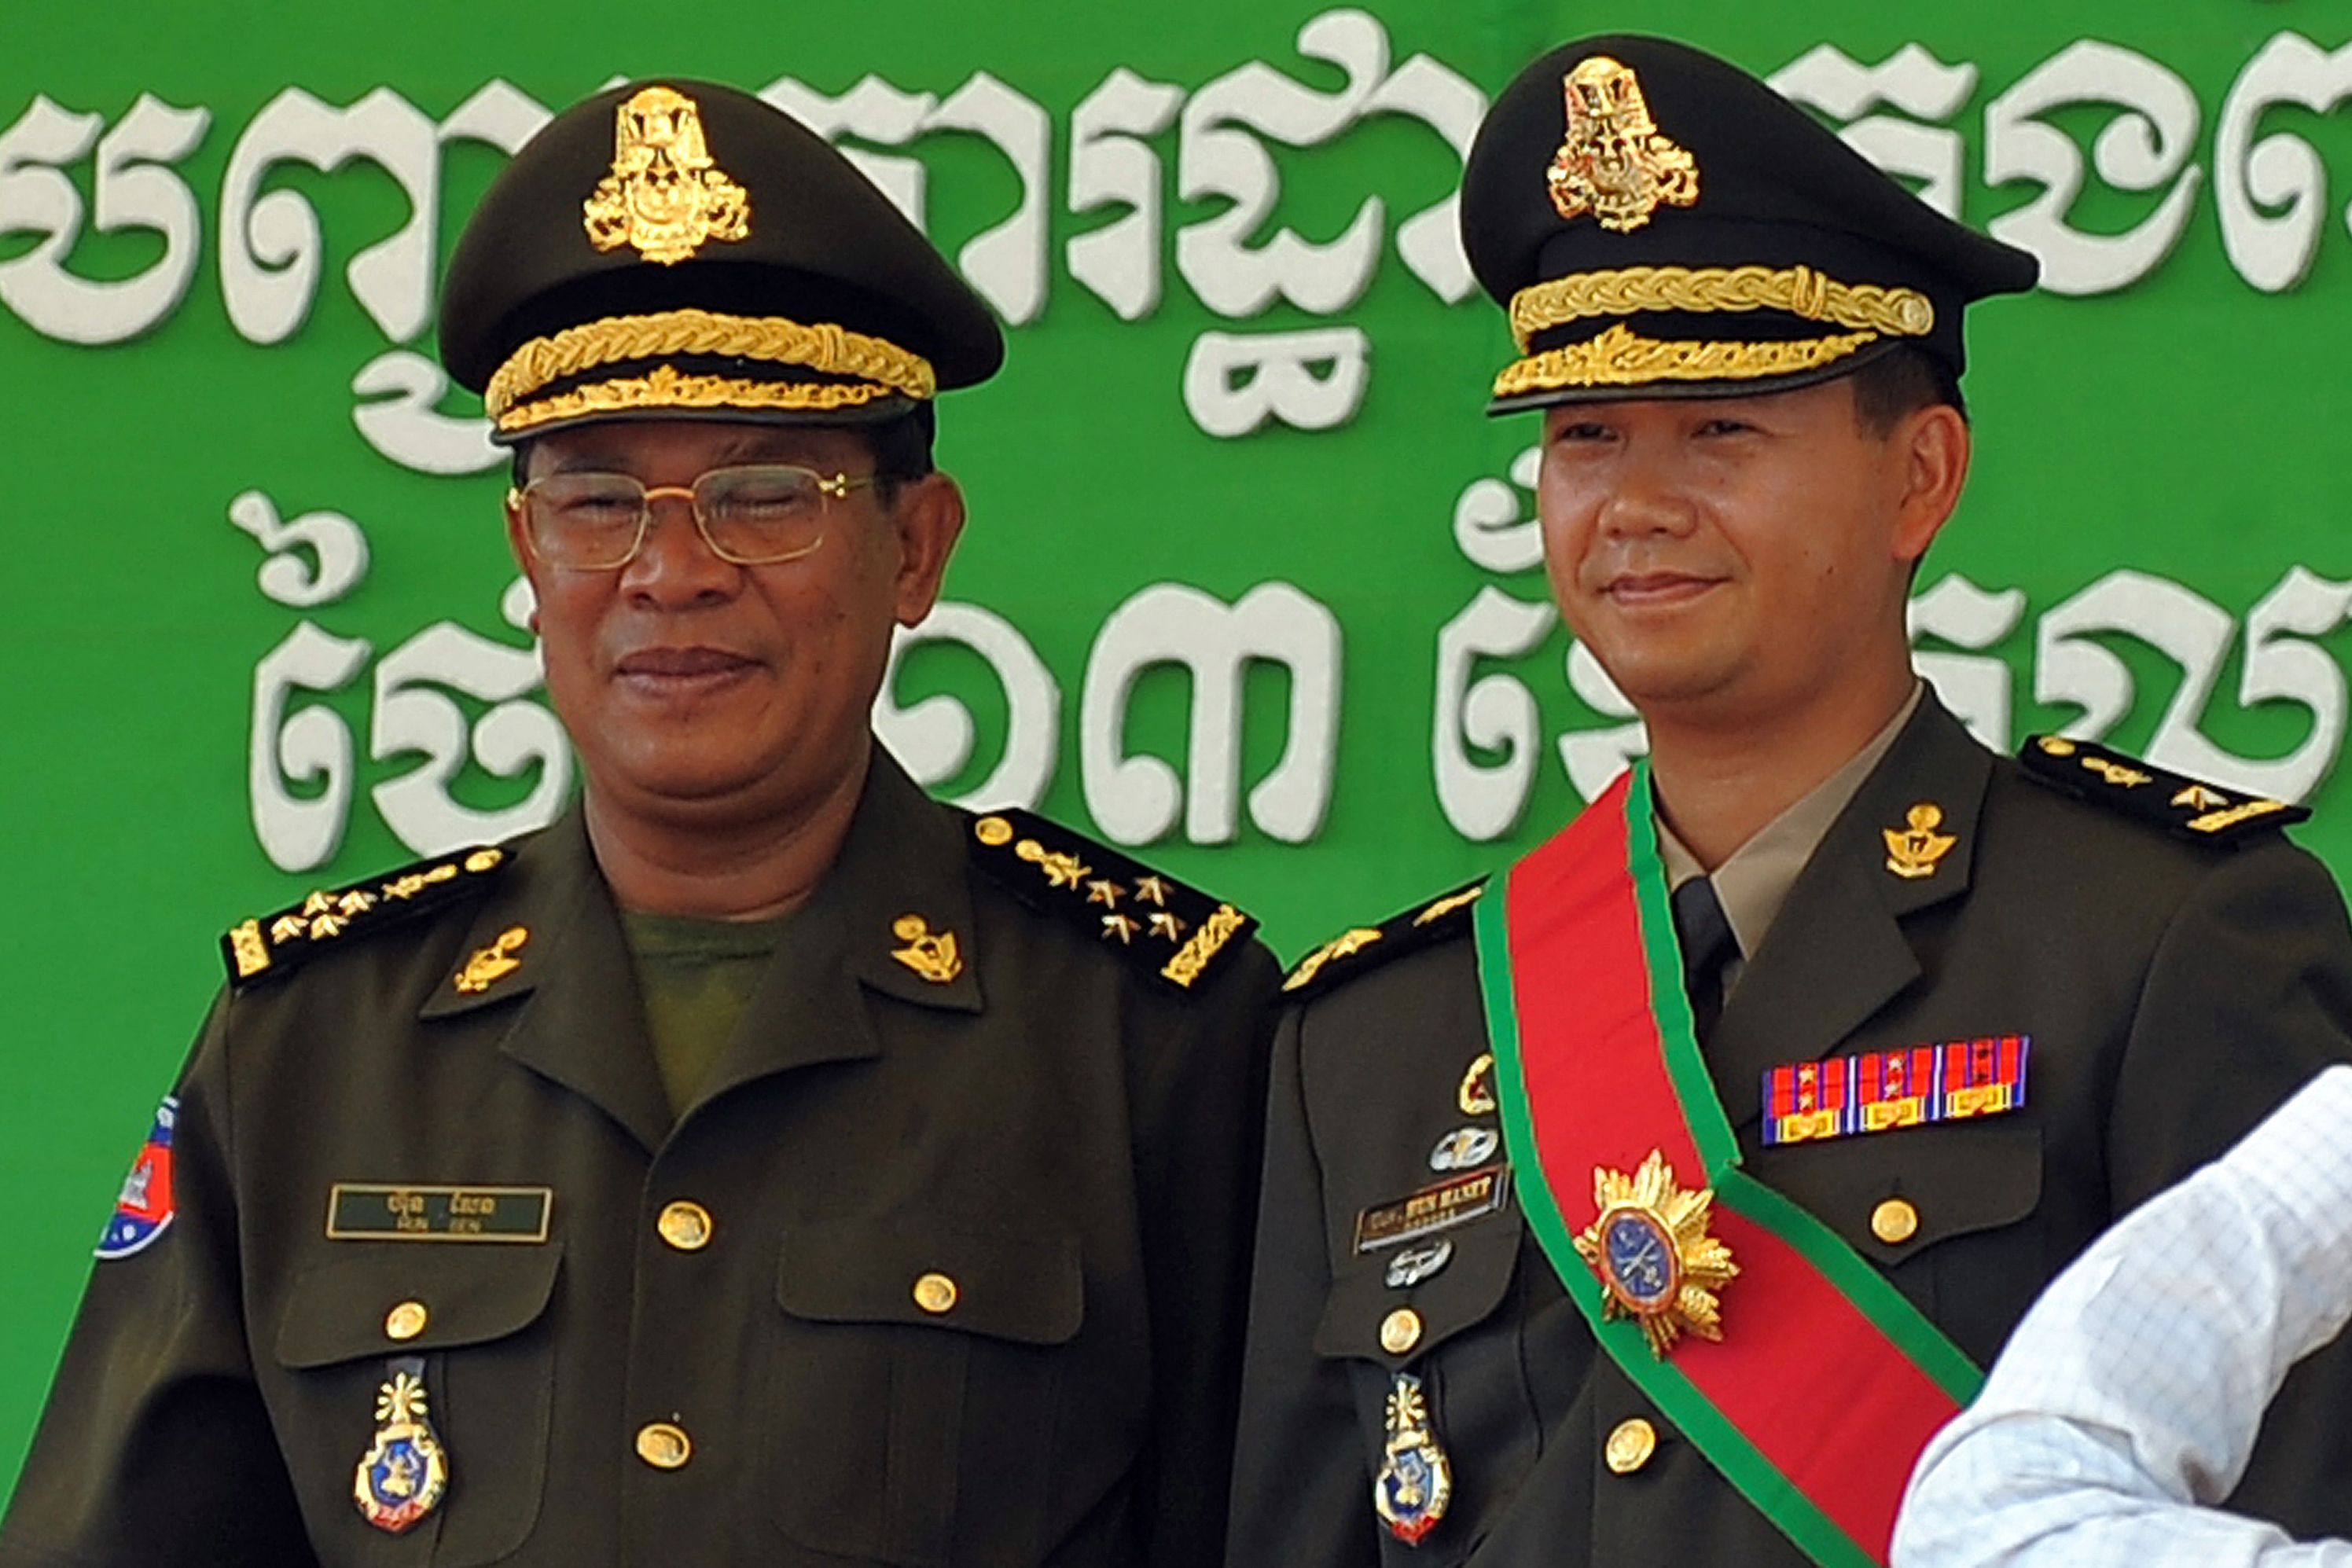 Cambodia’s Prime Minister Hun Sen (L) poses with his son Hun Manet during a ceremony at a military base in Phnom Penh. - Cambodia’ in 2009.
Photo: AFP/TANG CHHIN Sothy